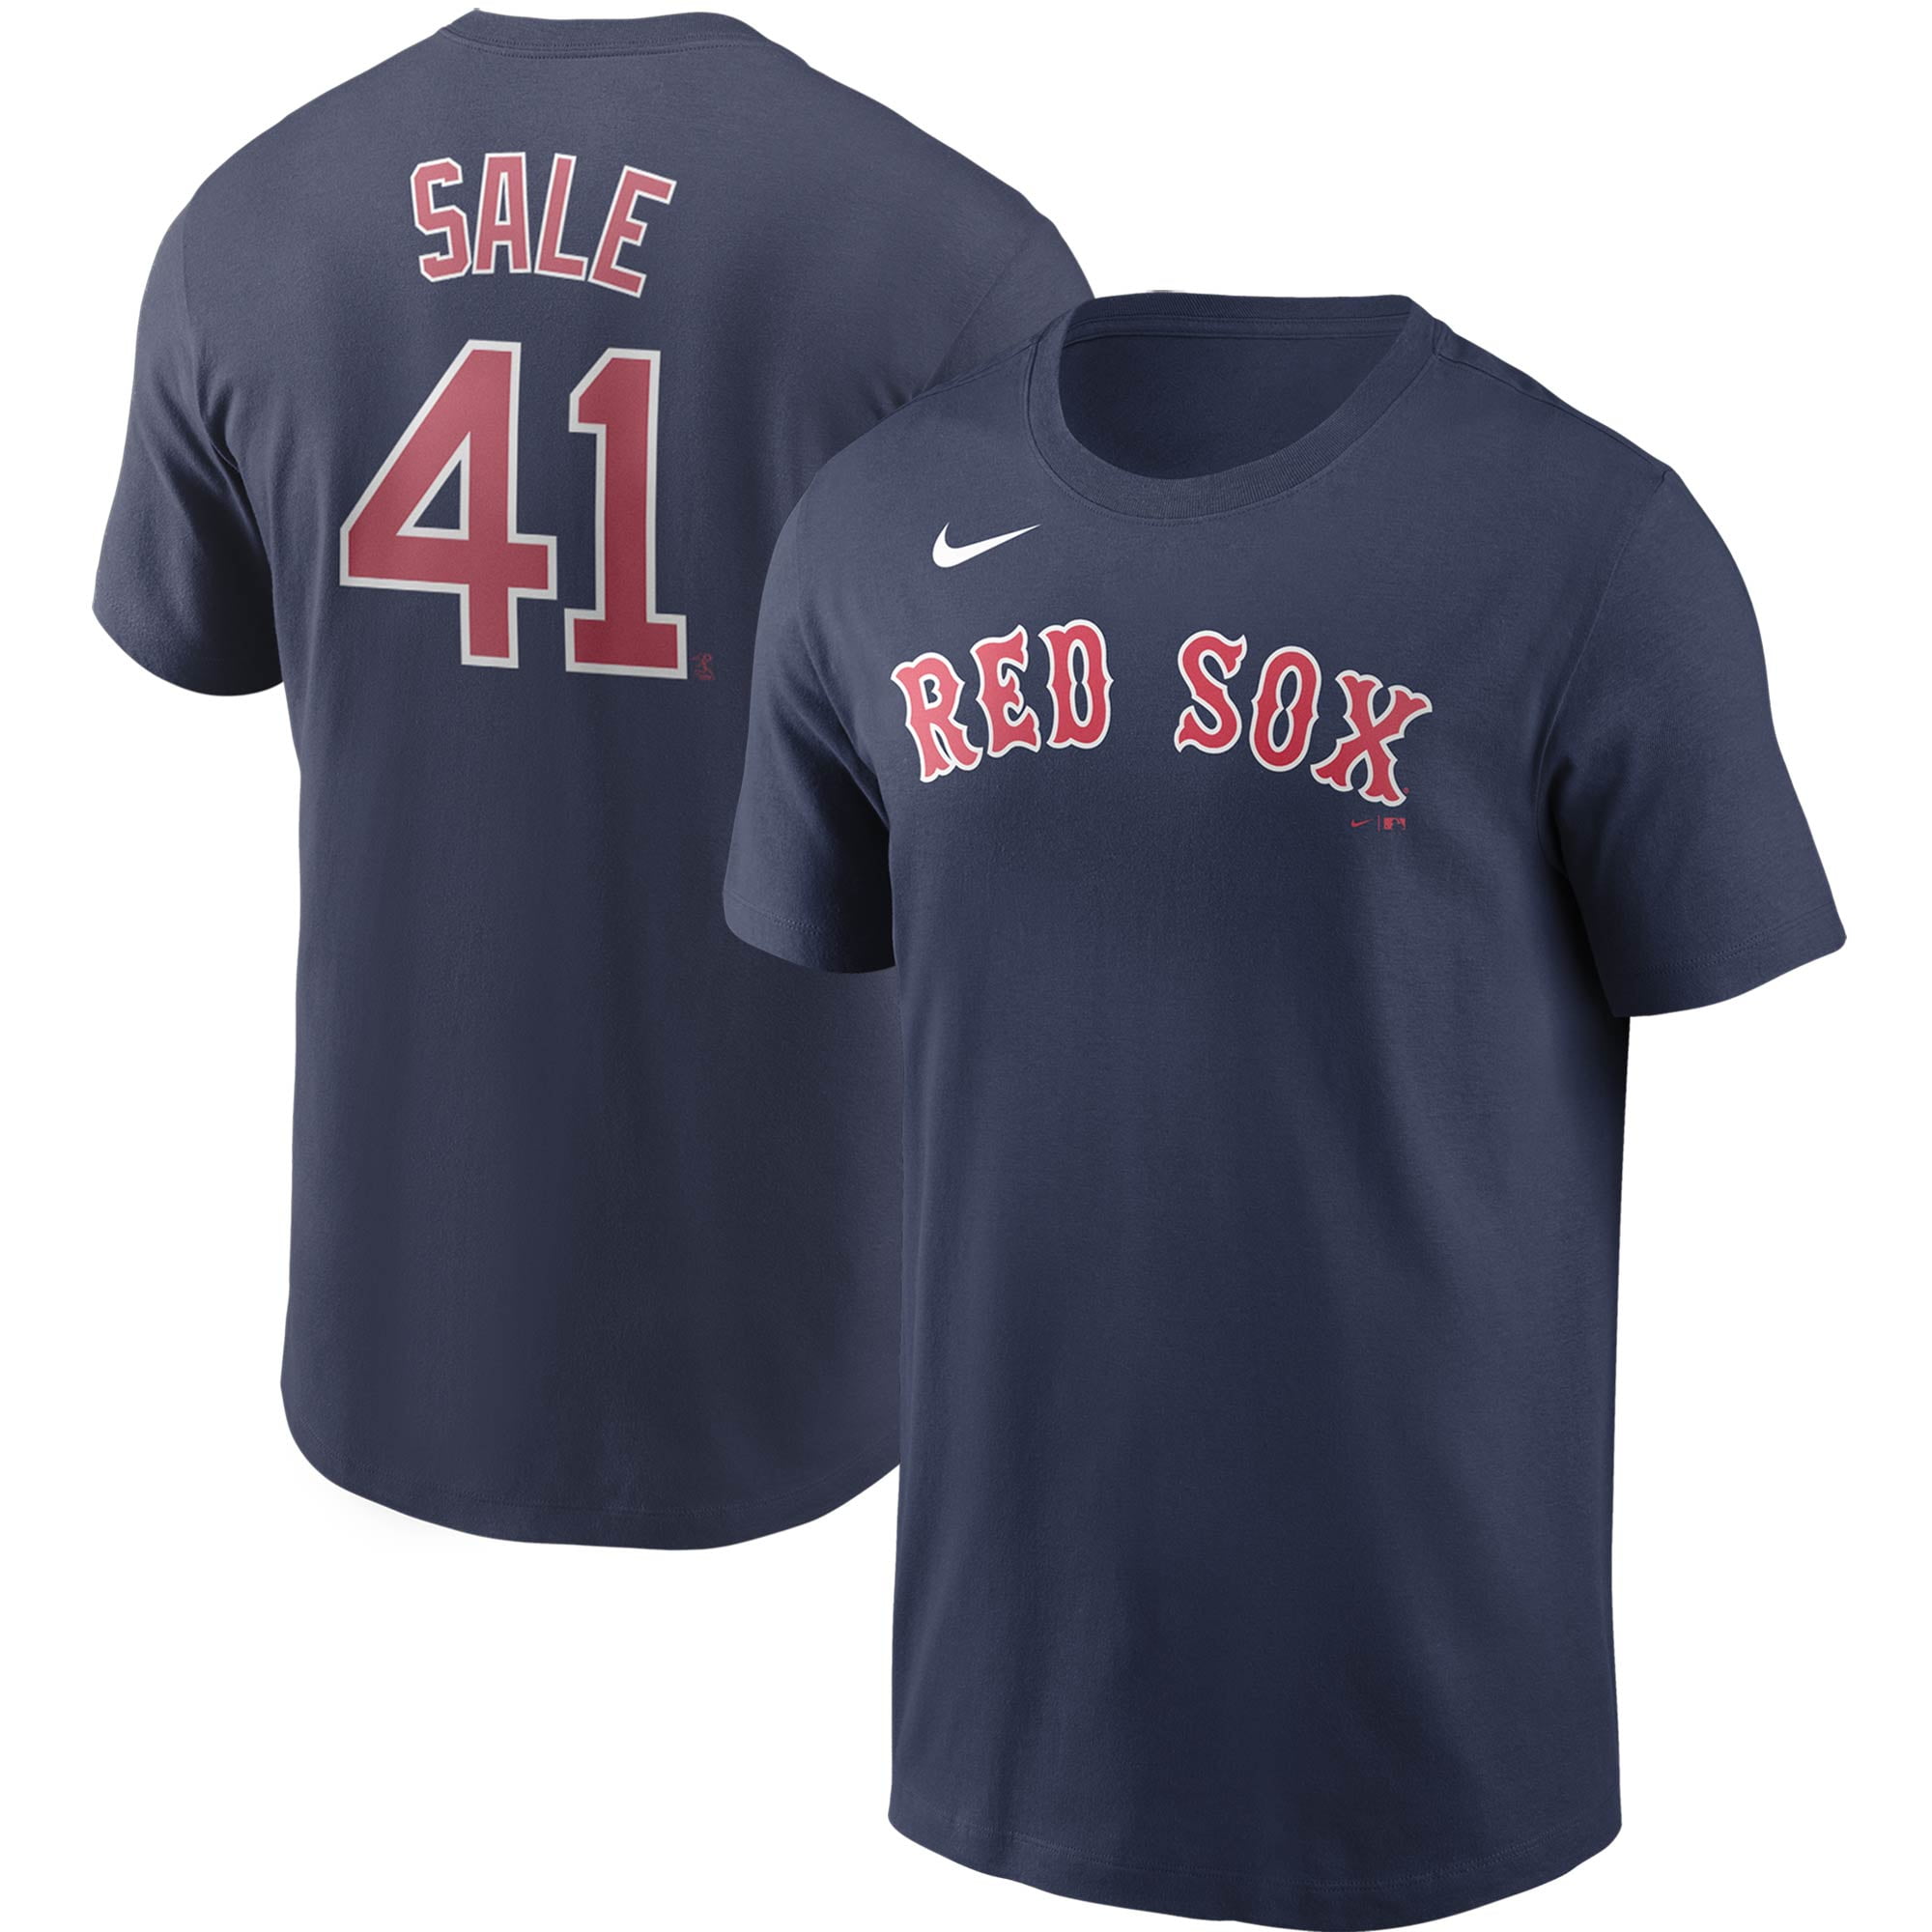 red sox chris sale jersey